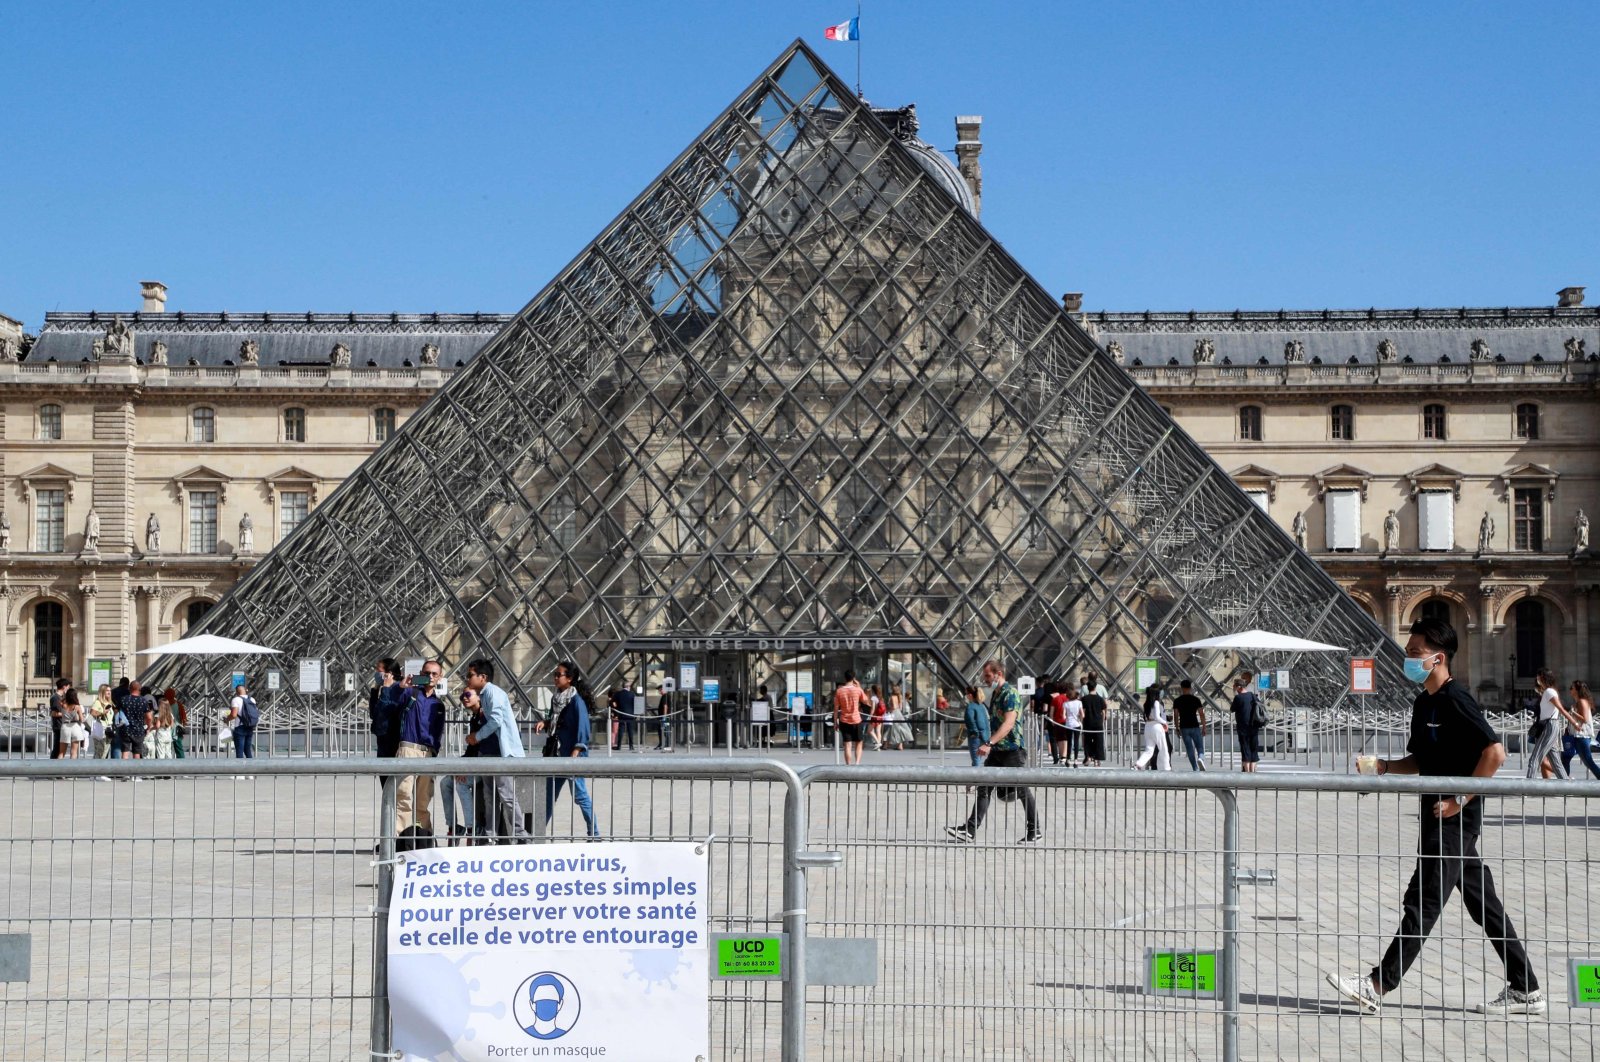 People wearing face masks walk in front of the Louvre Pyramid, Paris, France, Aug. 27, 2020. (AFP Photo)